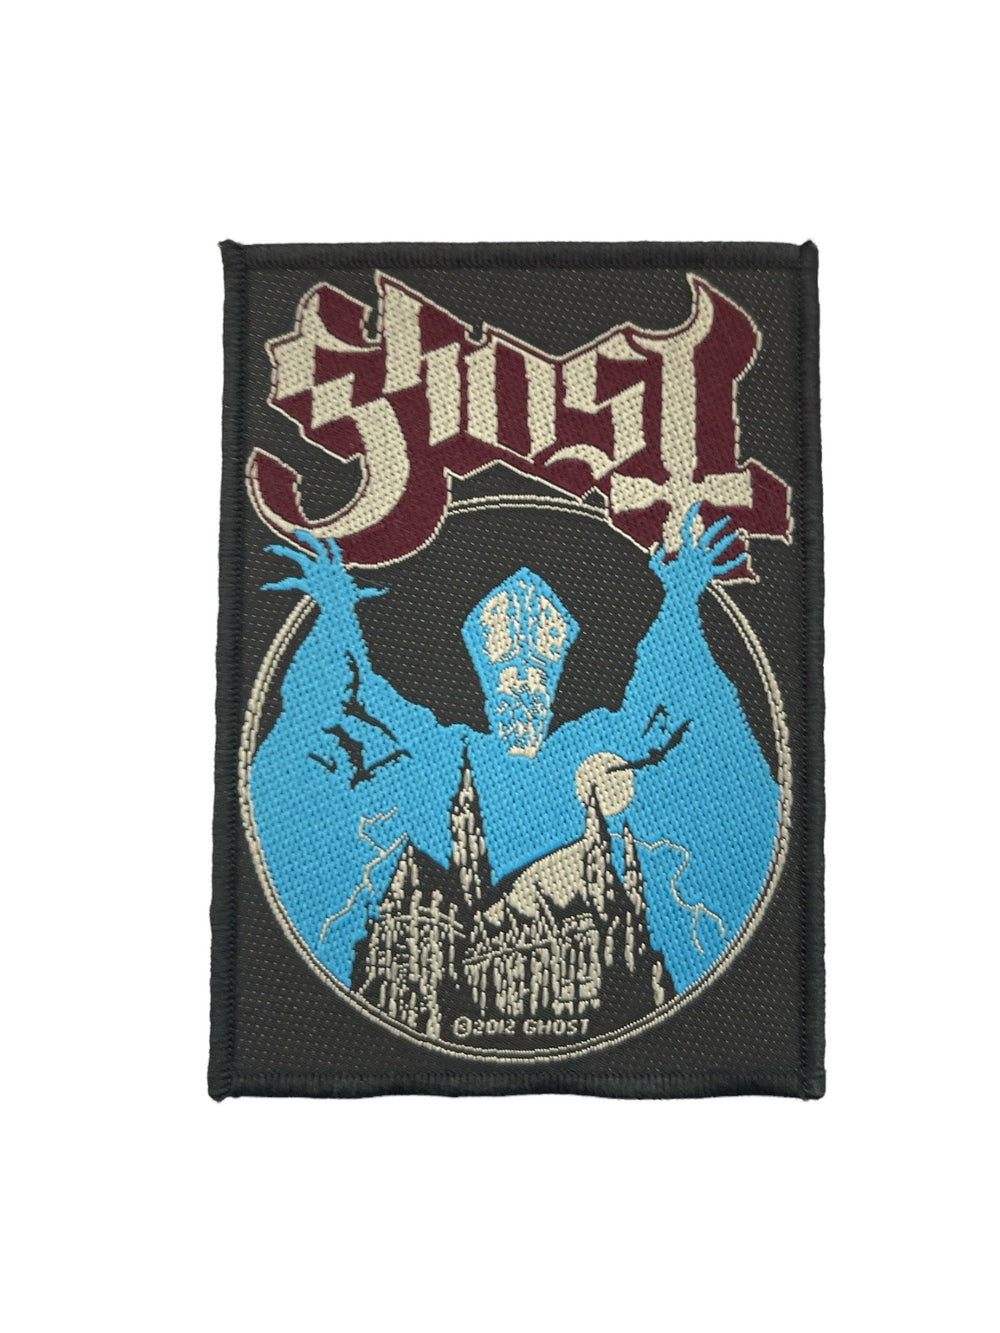 Ghost Opus Eponymous Official Woven Patch Brand New